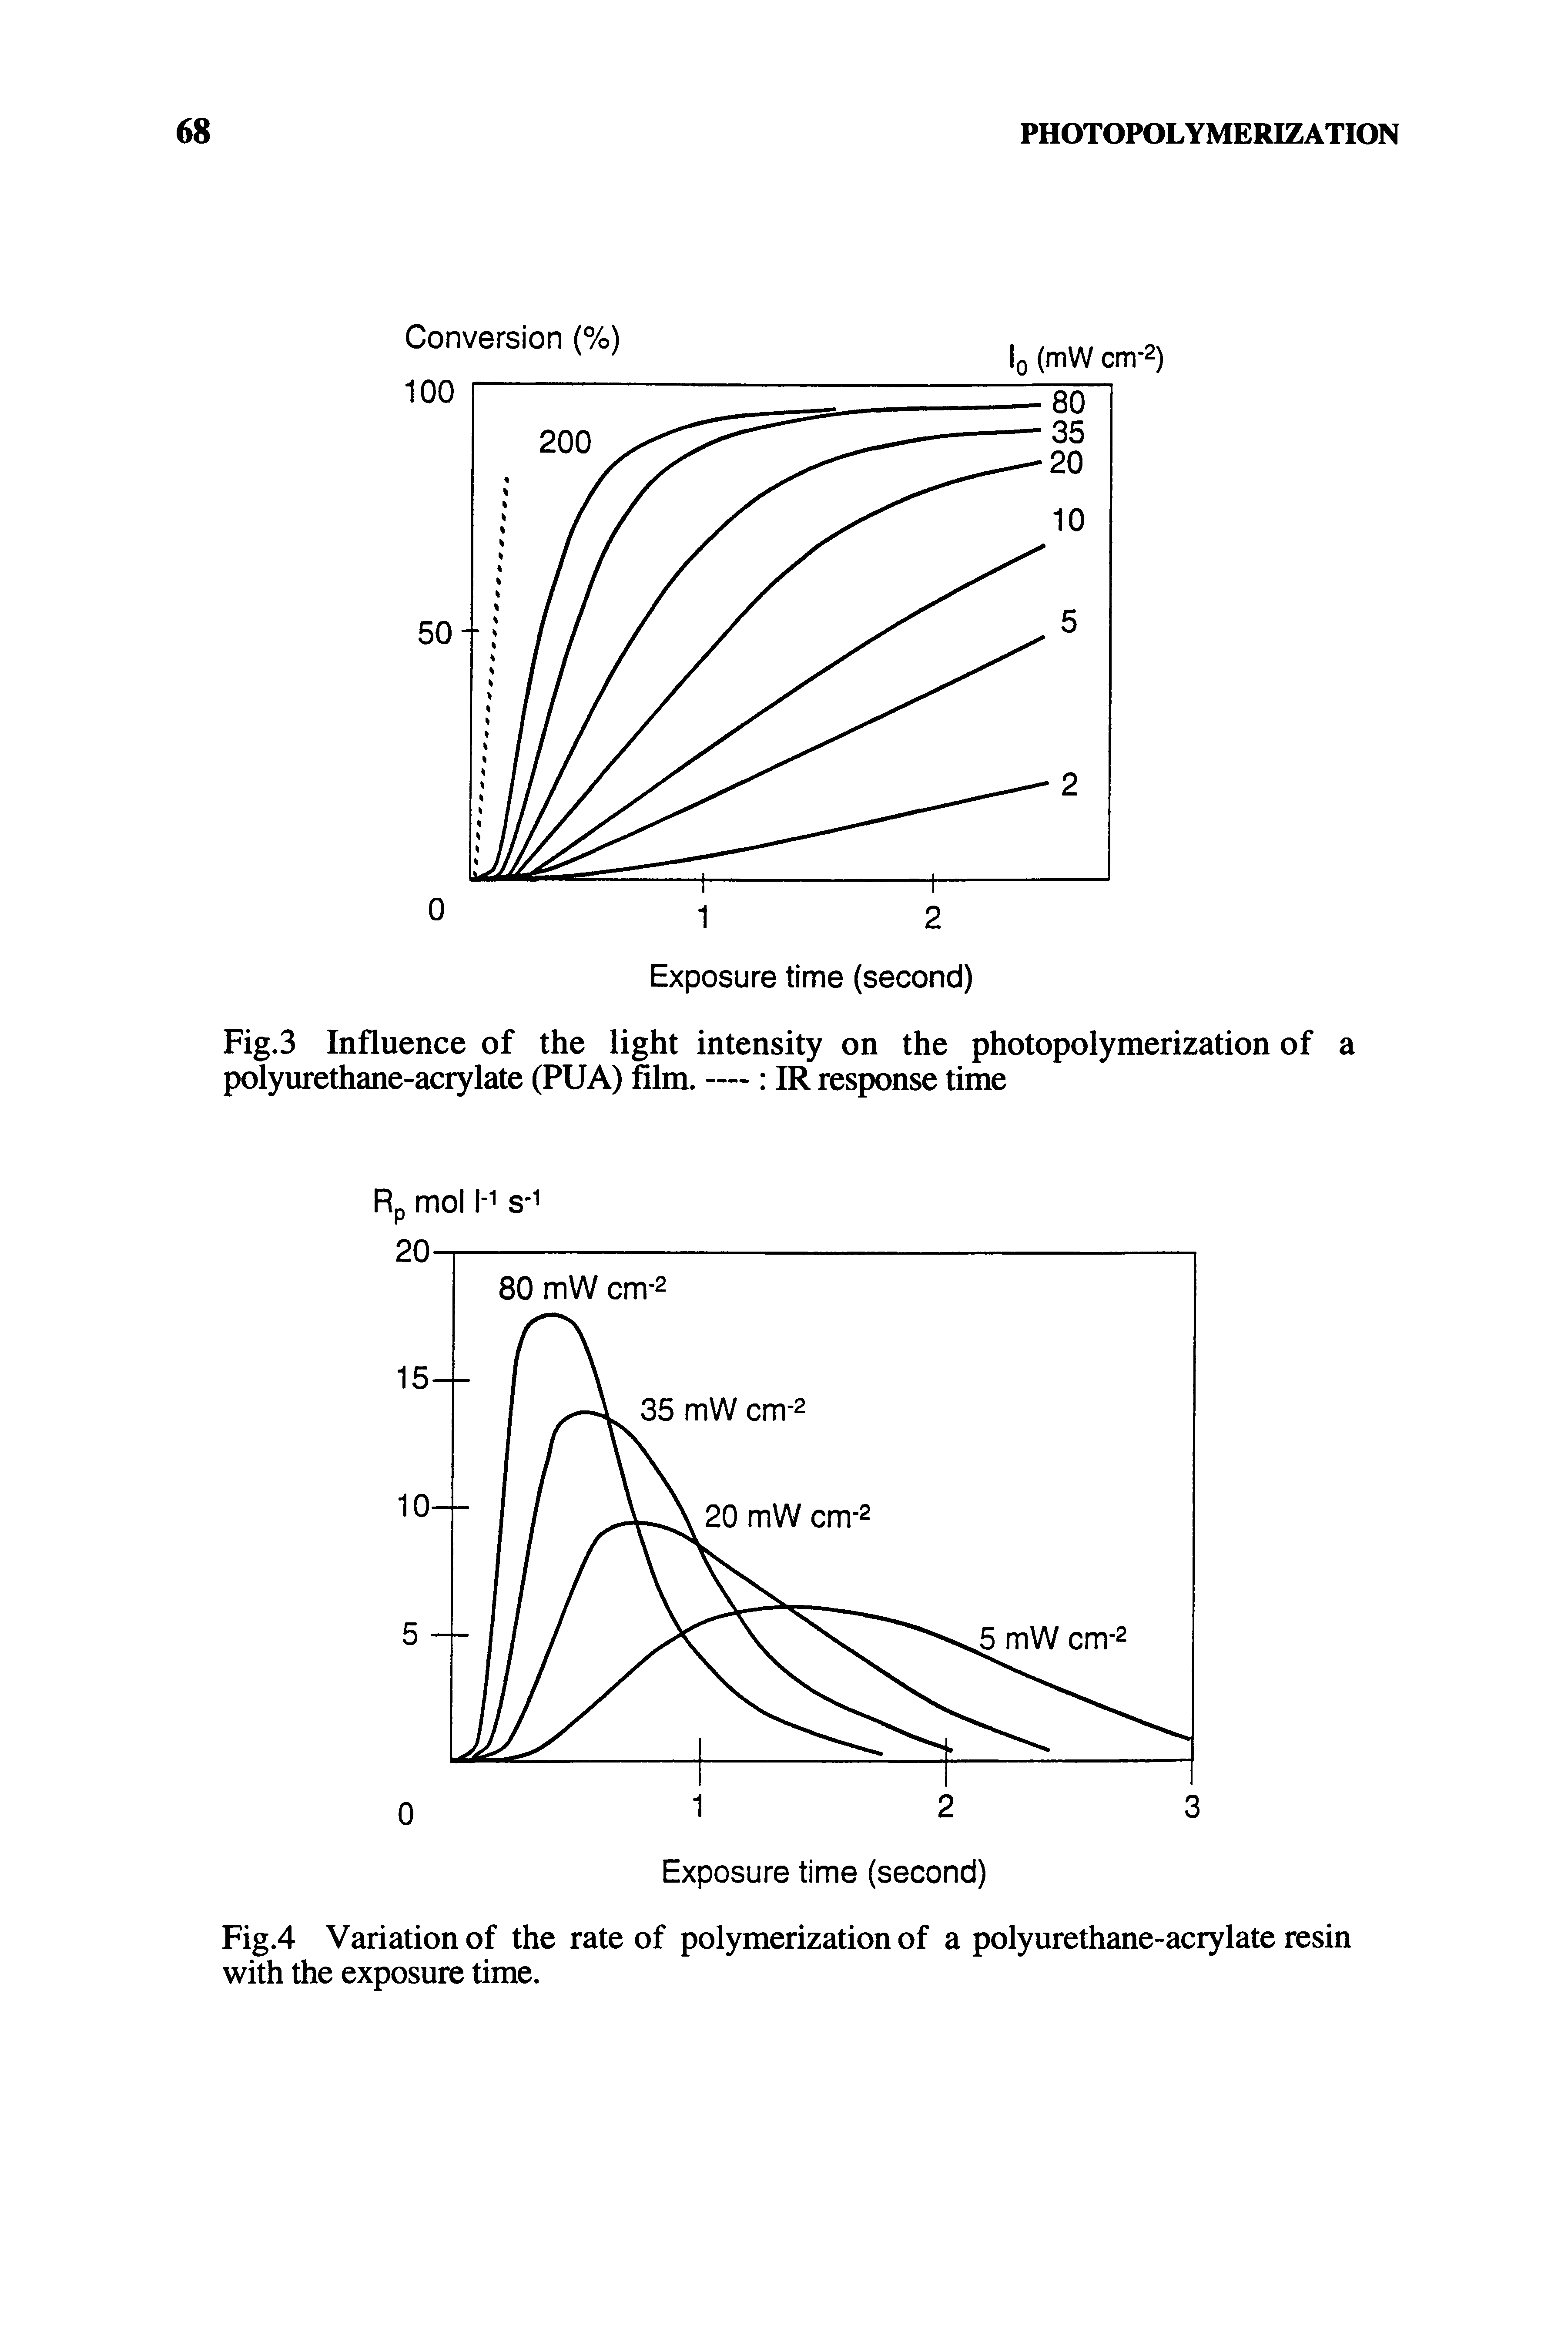 Fig.4 Variation of the rate of polymerization of a polyurethane-acrylate resin with the exposure time.